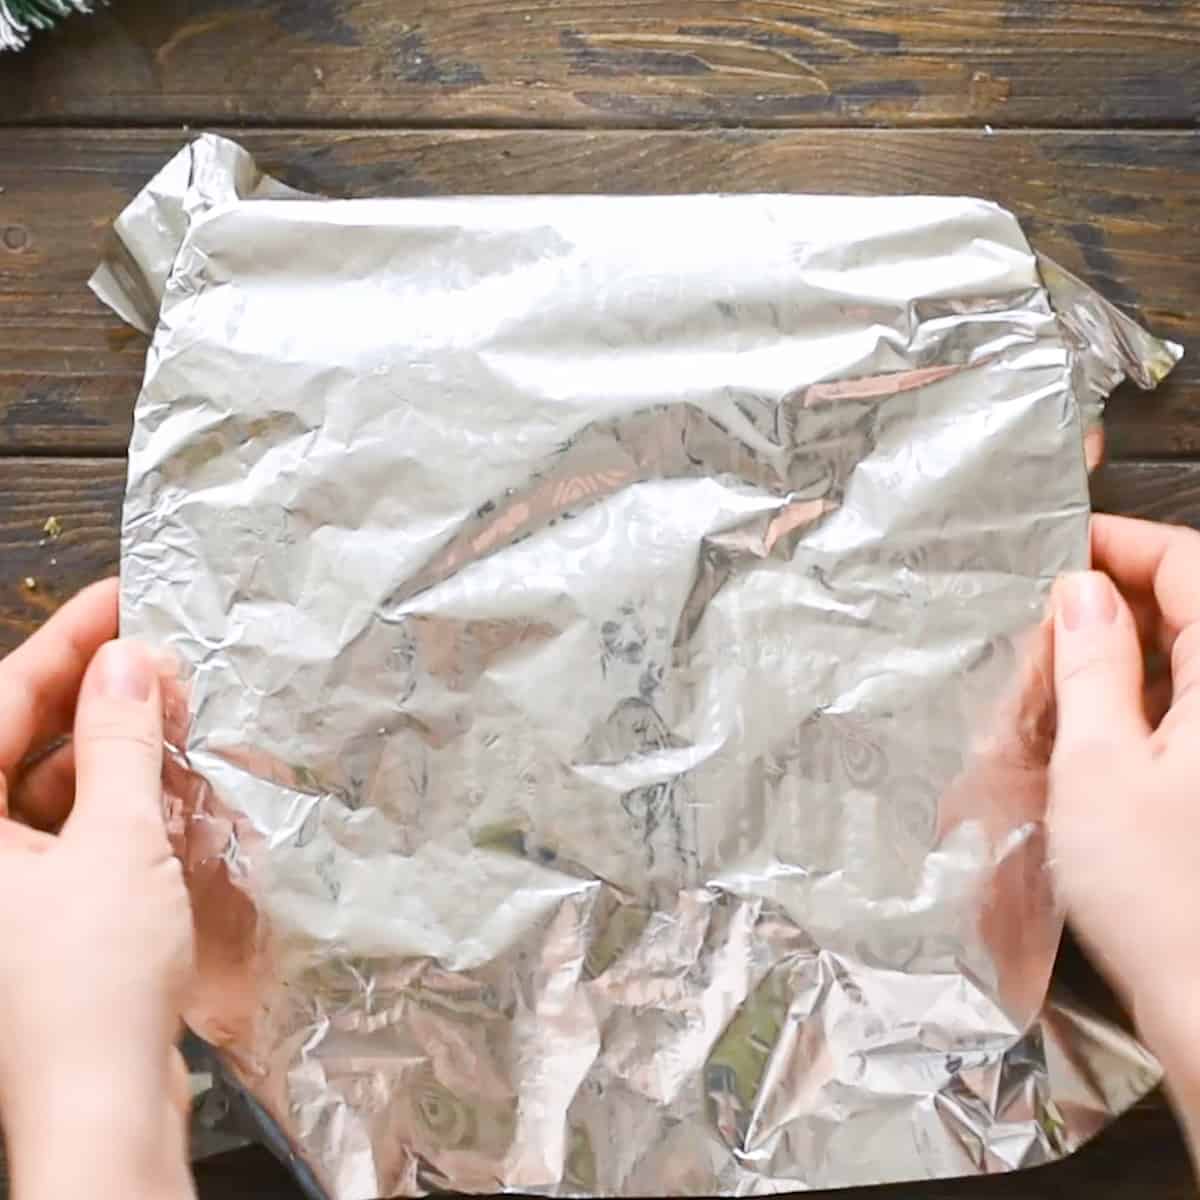 Covering a 9x9 inch baking dish with foil.